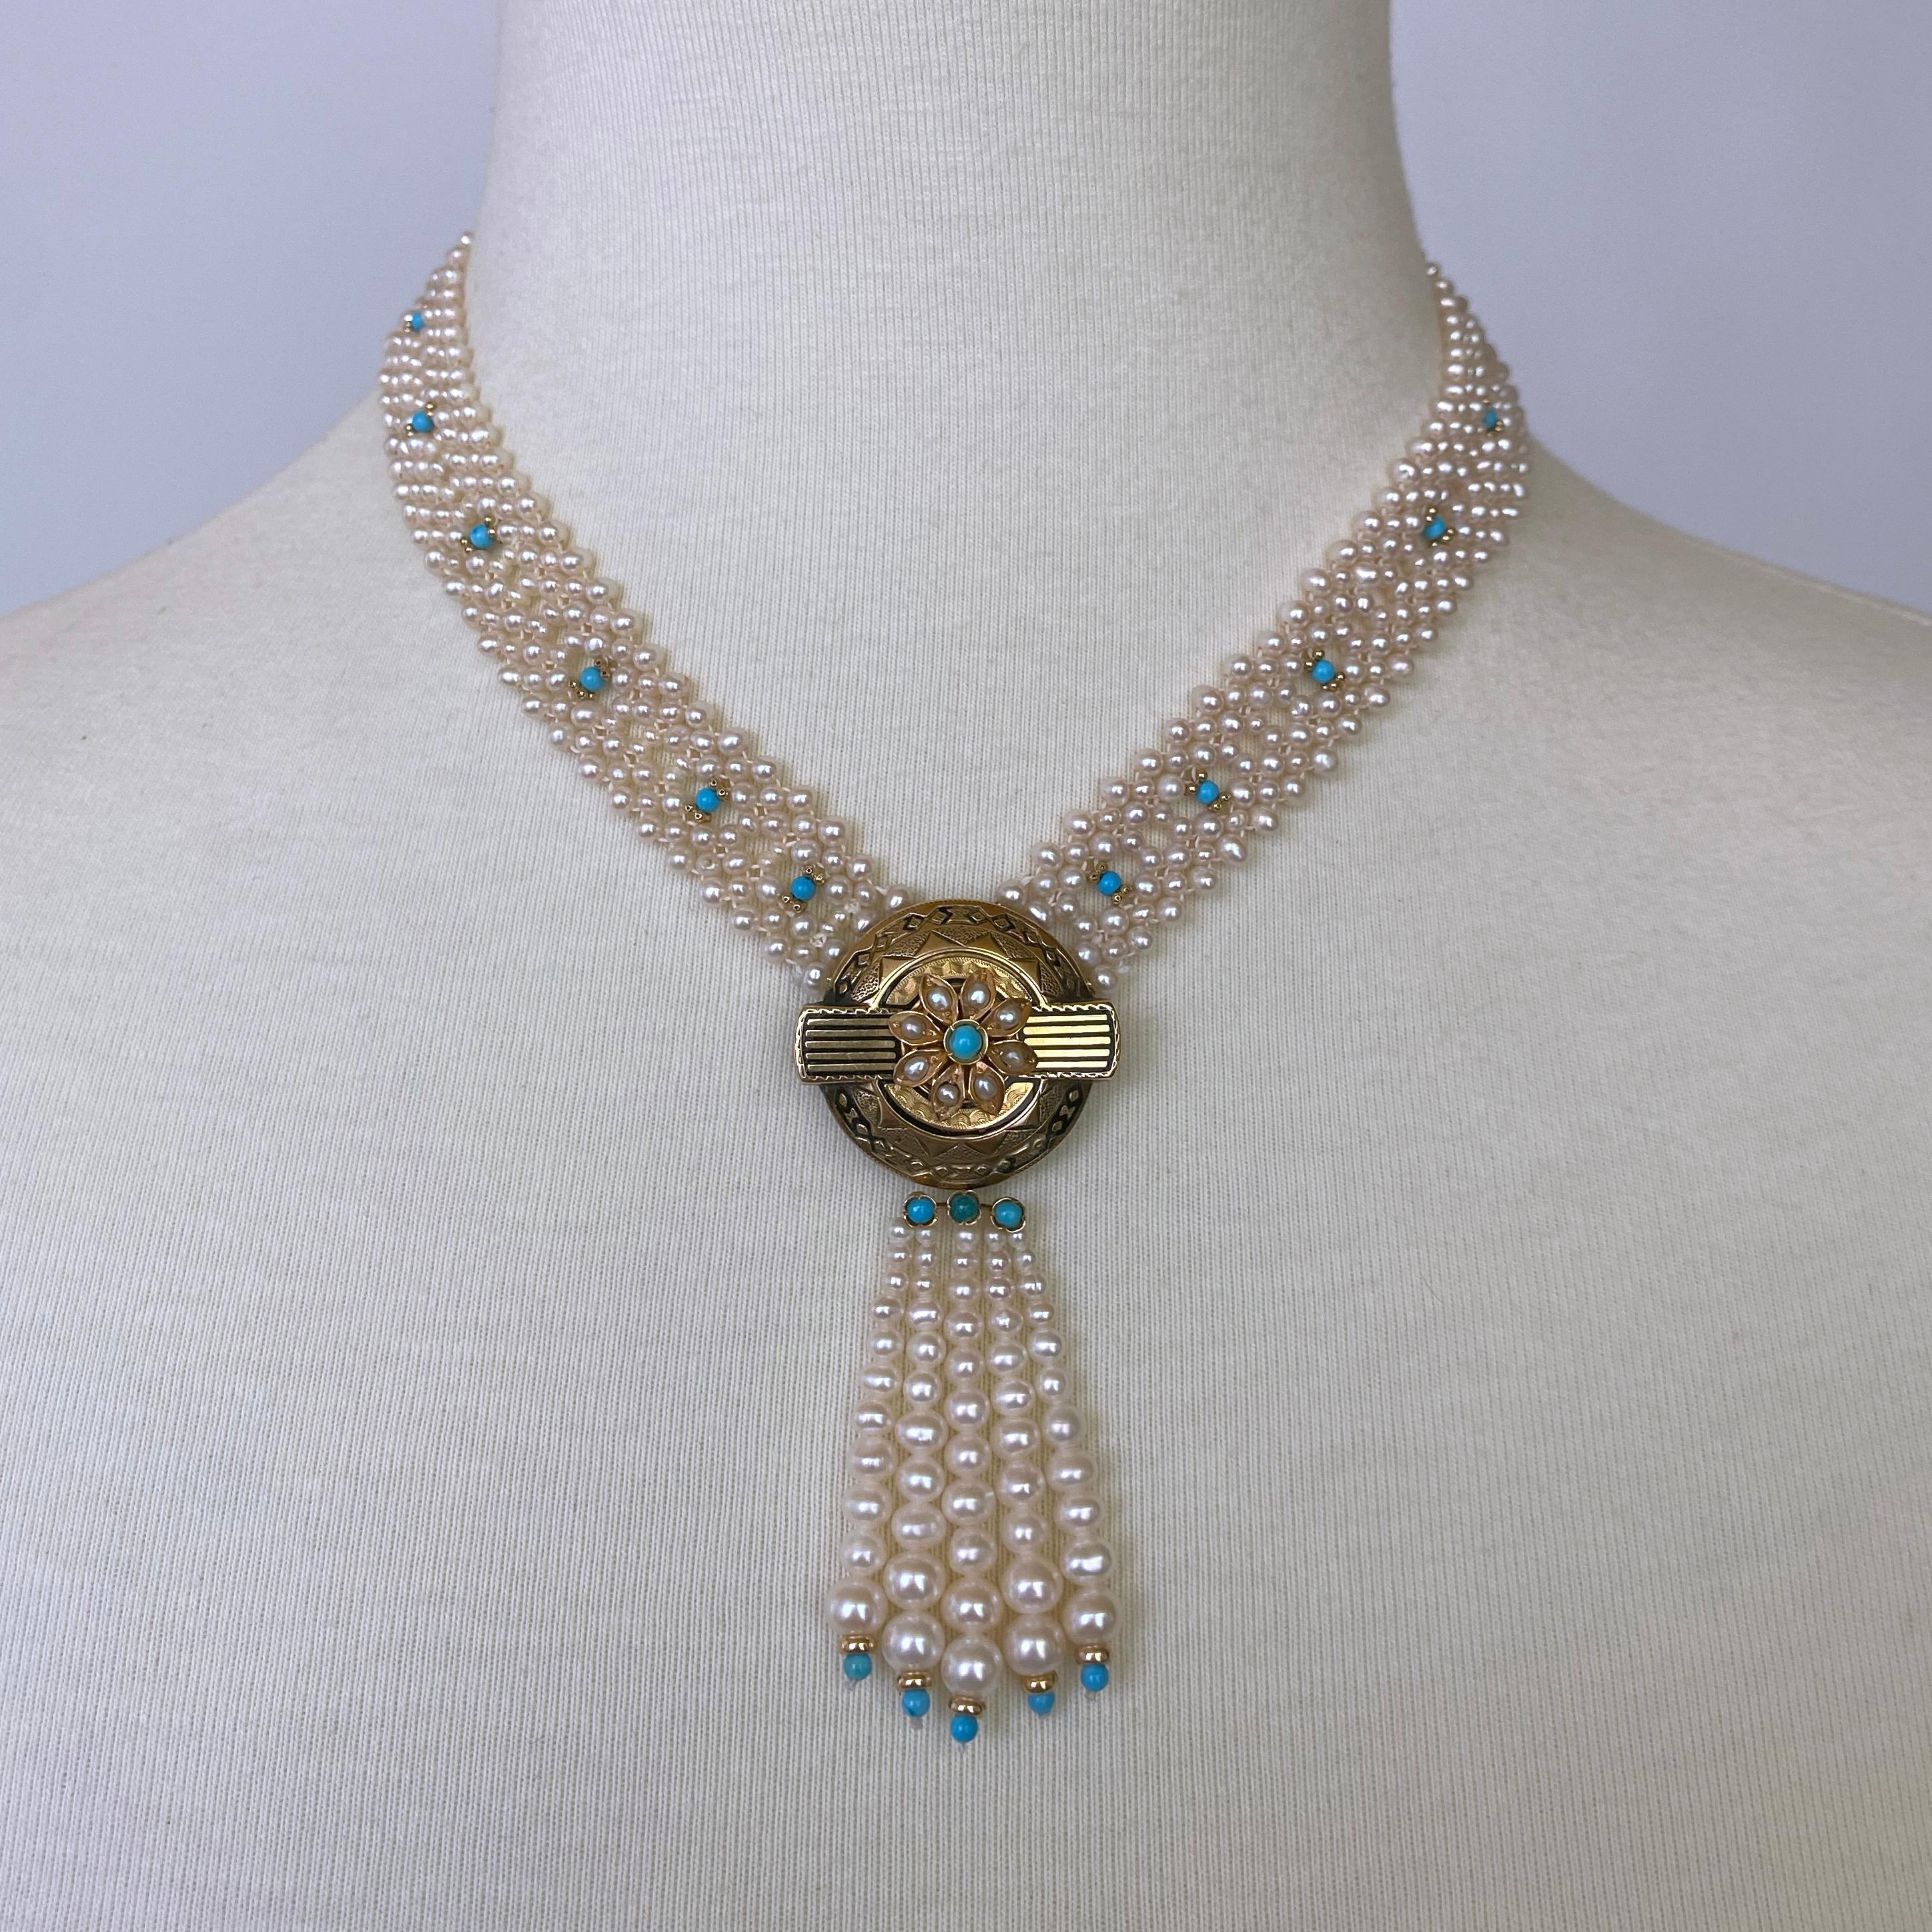 Beautiful and unique piece made by Marina J. This Necklace features a one of a kind Early 20th Century Vintage 14k Yellow Gold Brooch with Pearl and Turquoise detailing that has been reworked into a Centerpiece from which five Graduated strands of